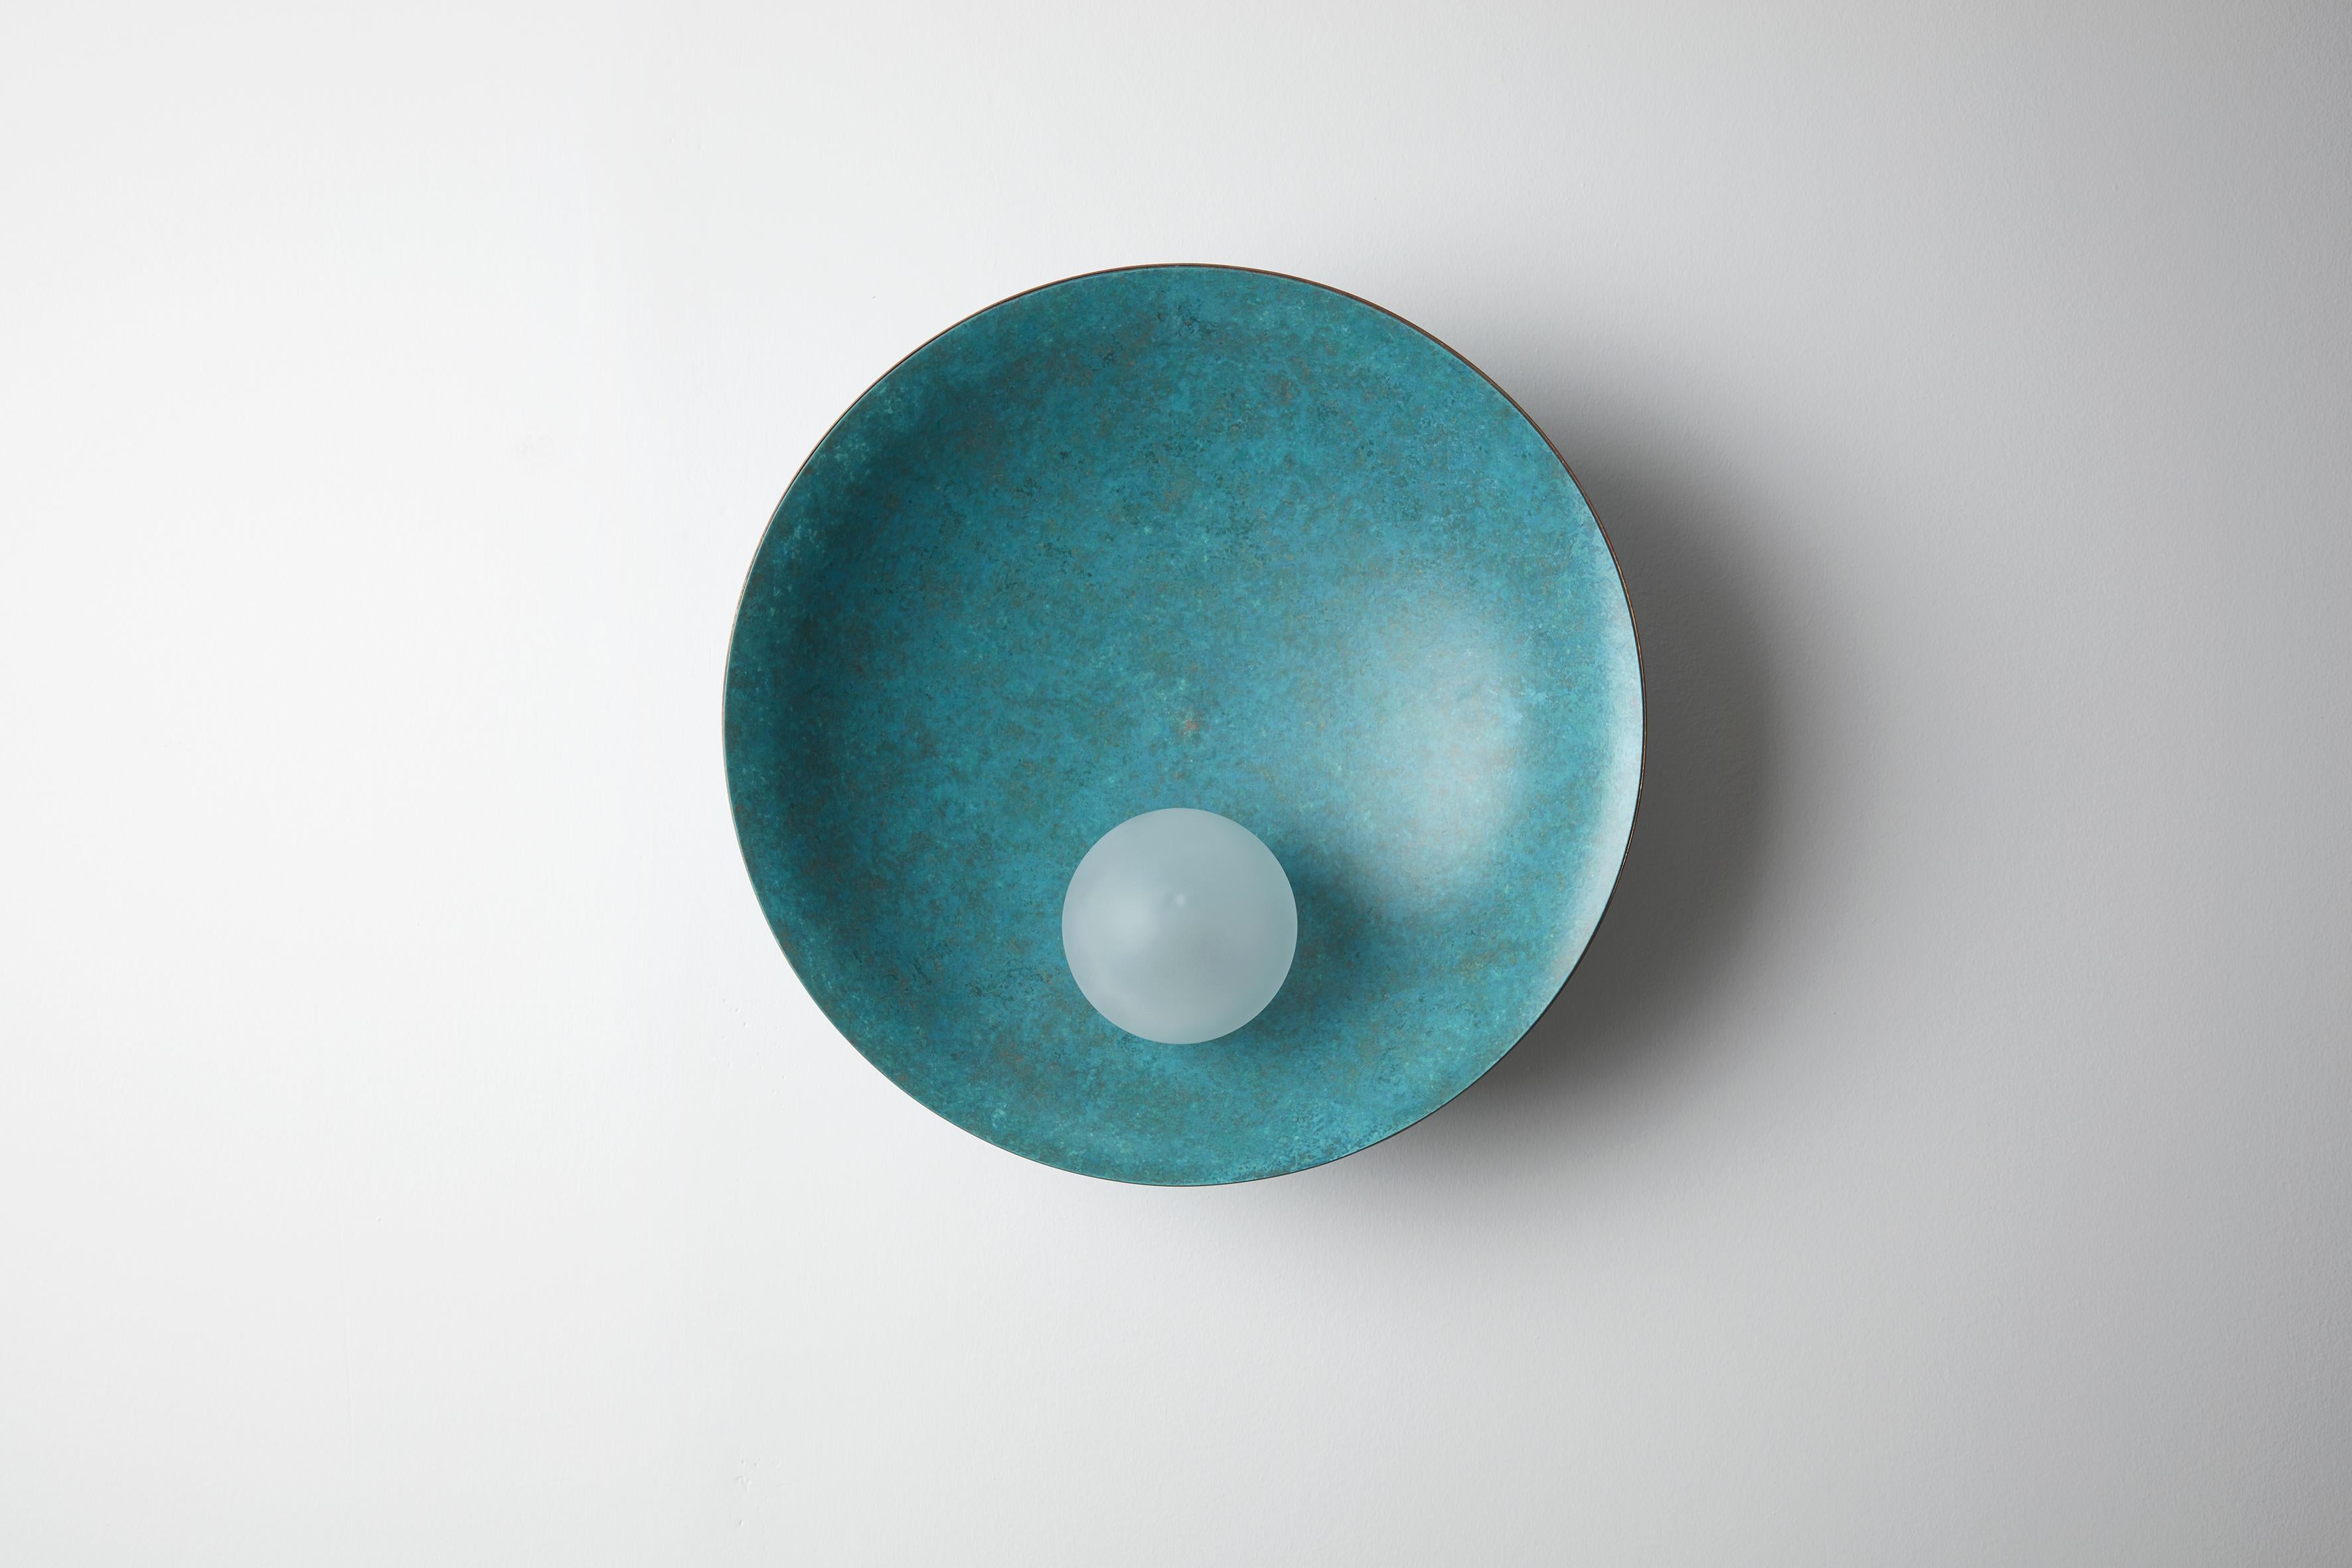 Oyster wall-ceiling mounted Verdigris, - Carla Baz
Dimensions: ø 40 x D 18 
Weight: 3.5 kg
Material: Brass, blown satin glass globes

Oyster is a series of sculptural lighting pieces that were developed in 2016. Wanting to explore the idea of